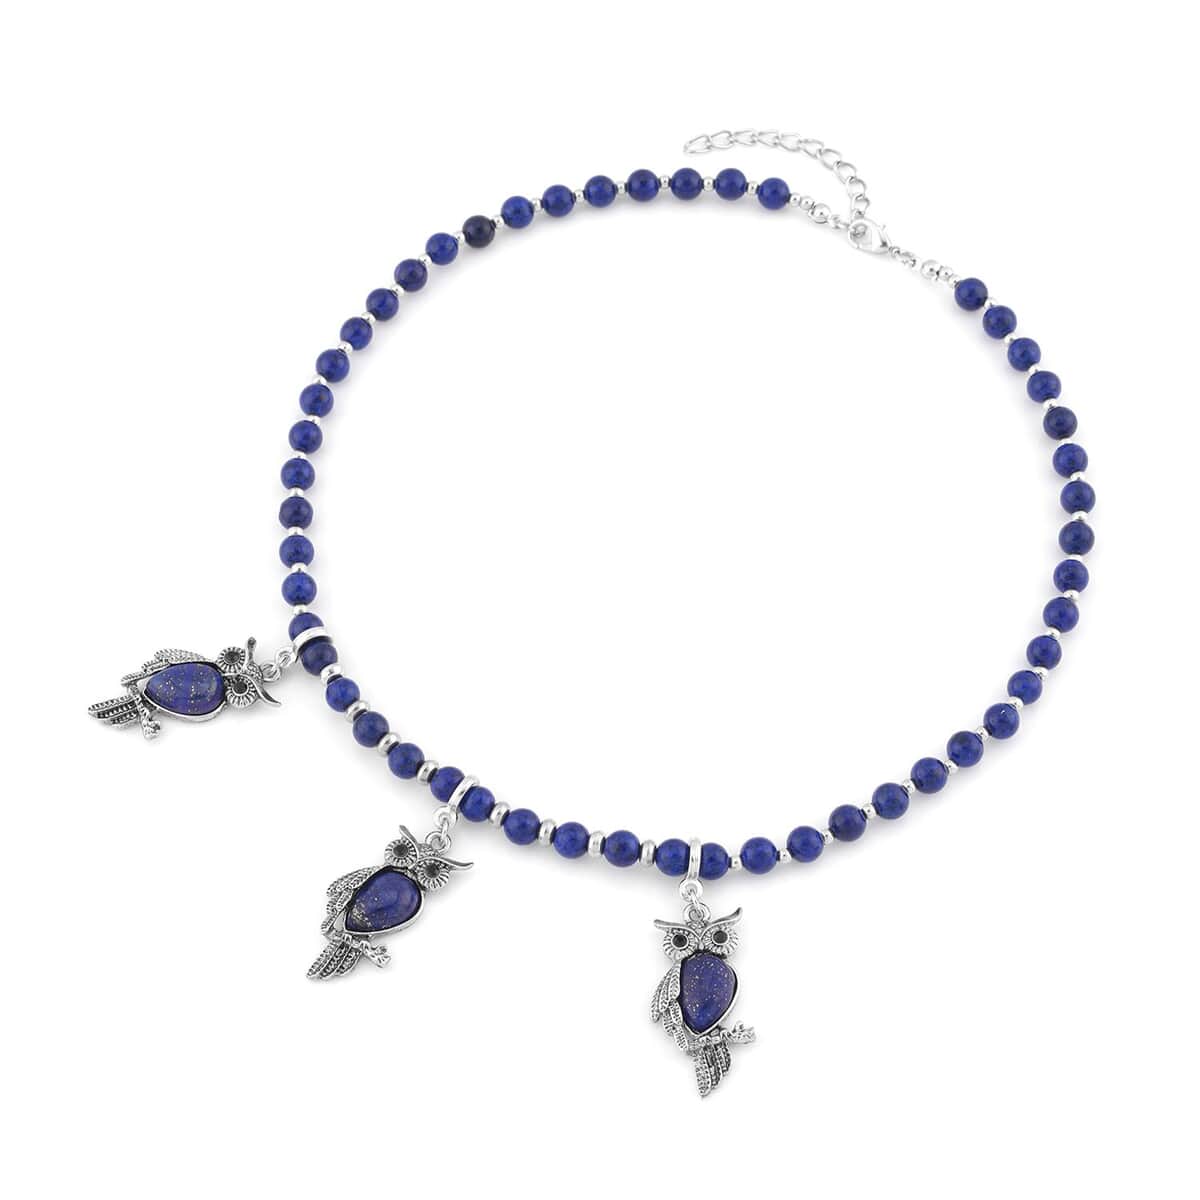 Lapis Lazuli and Black Glass Beaded Necklace 18-20 Inches with 3 Owl Charm Pendant in Black Oxidized Silvertone 115.00 ctw image number 2